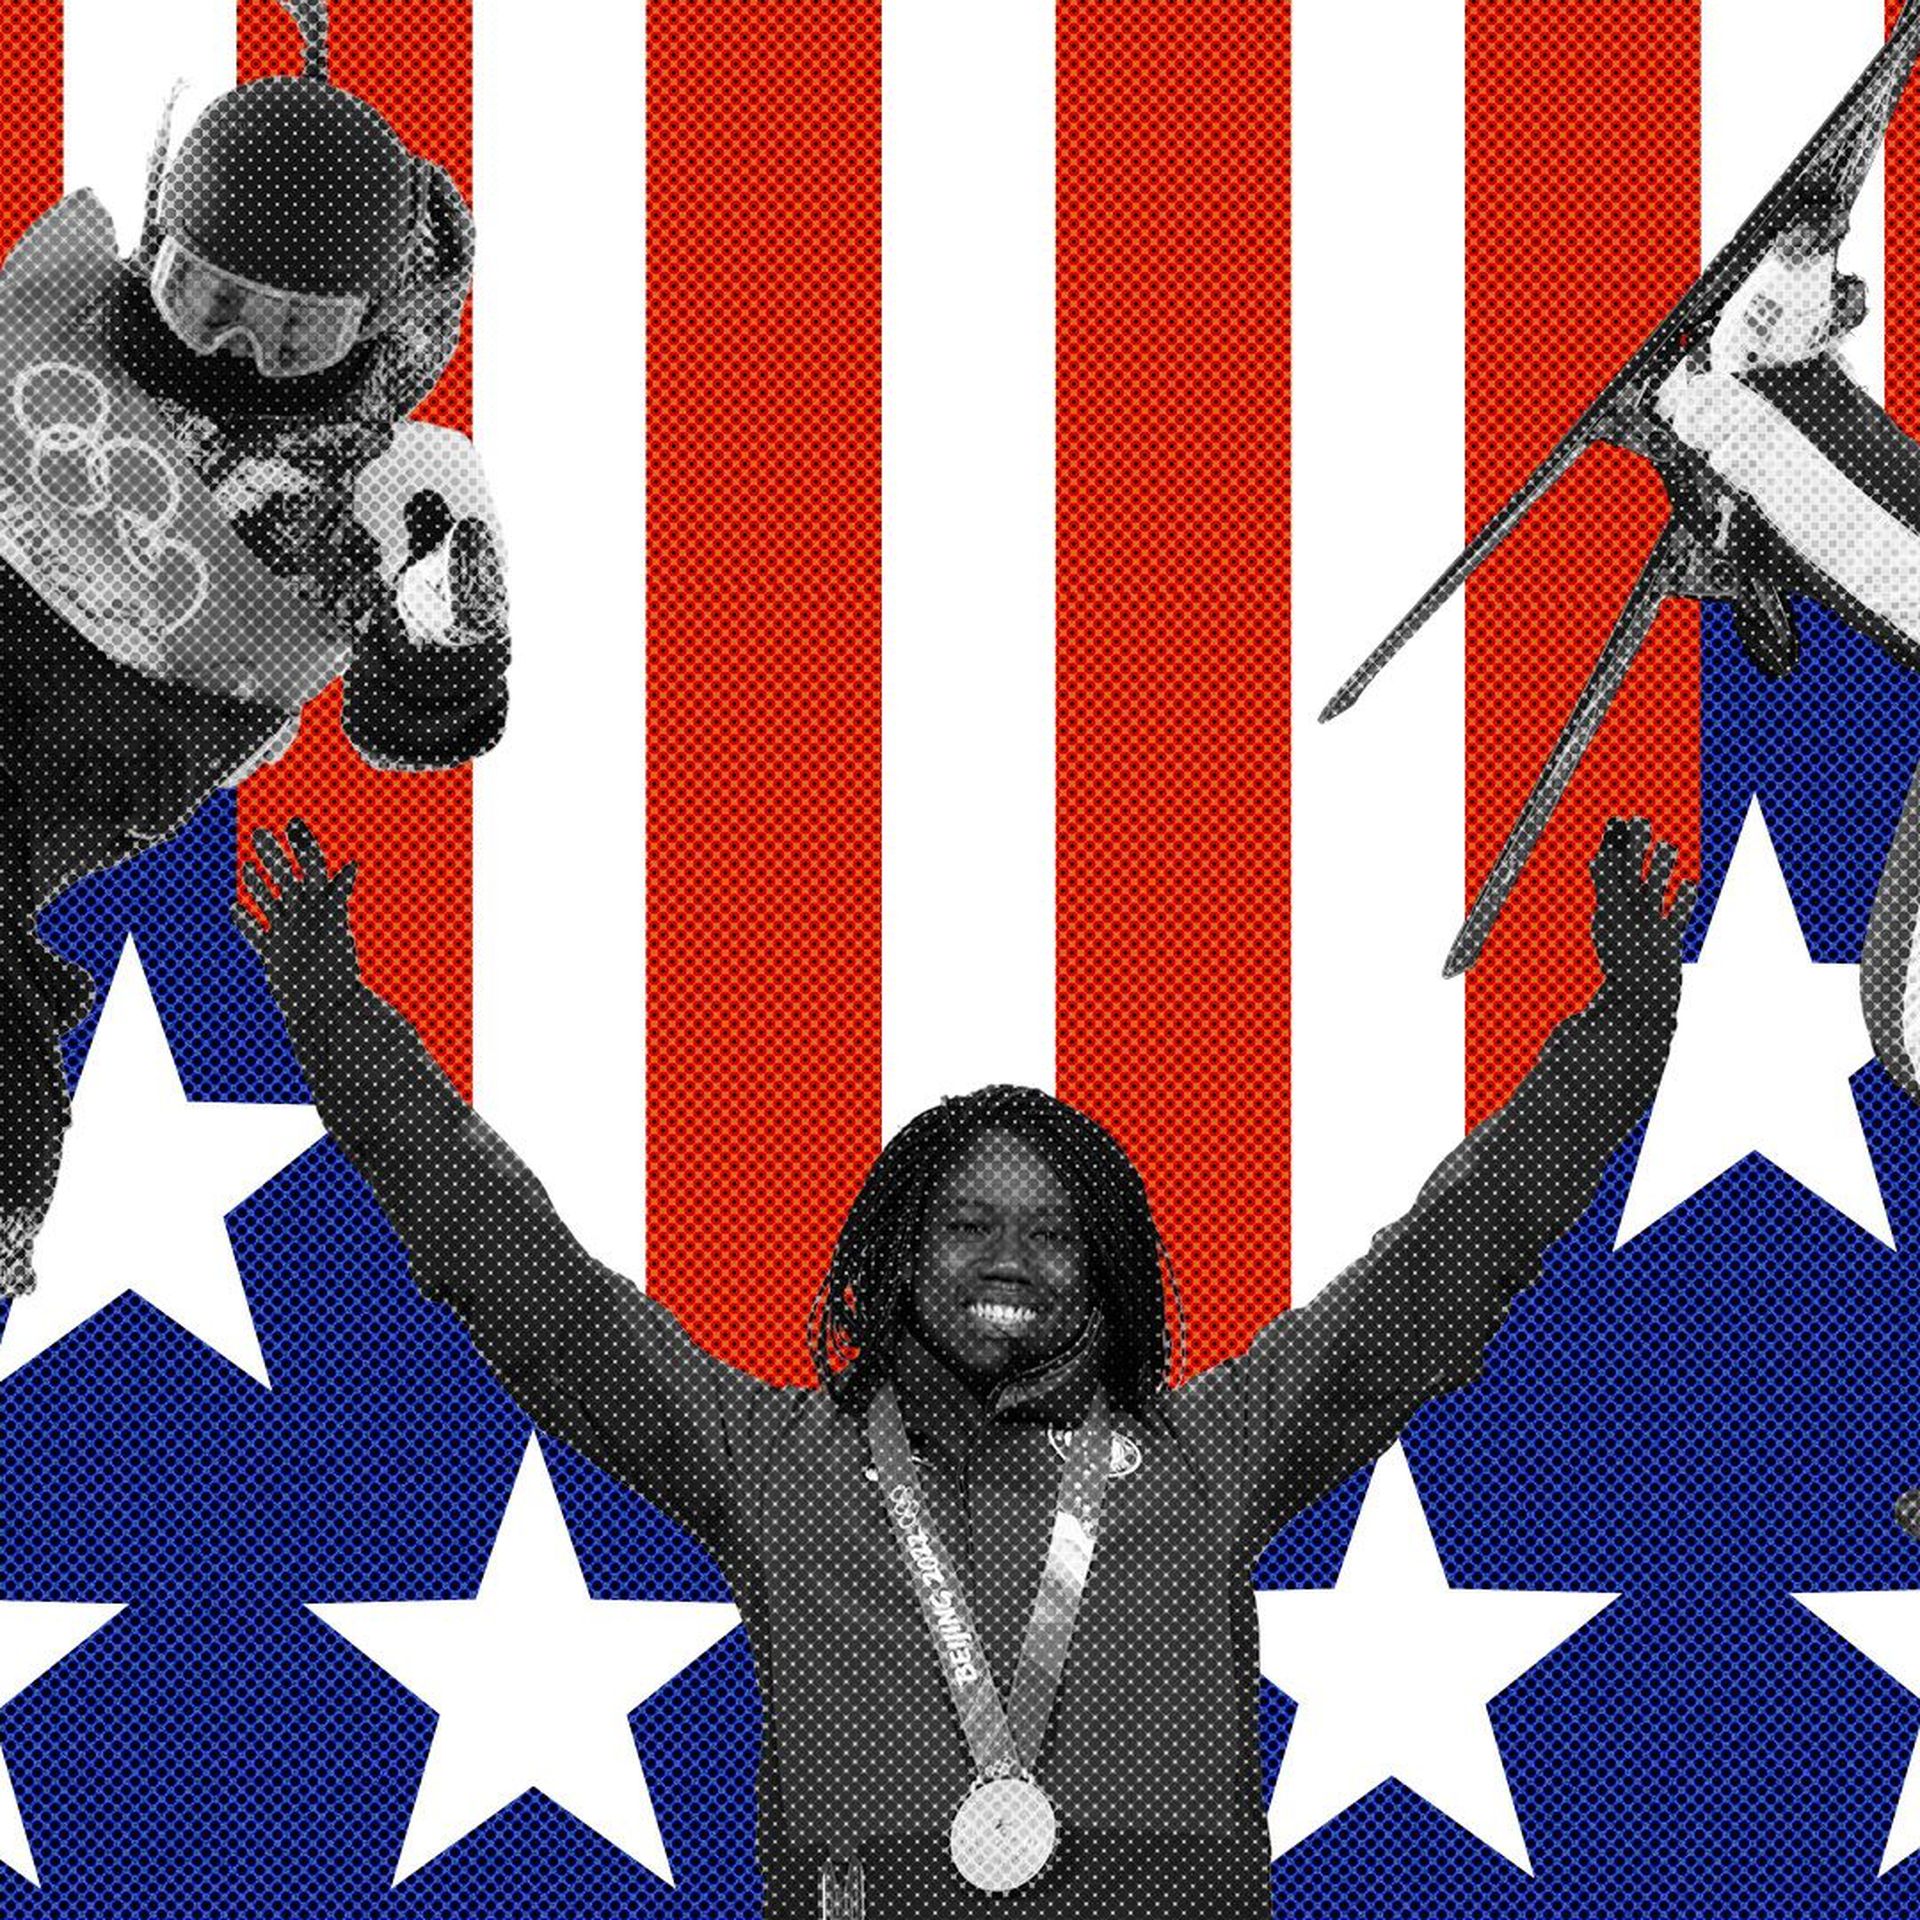 Photo illustration of Team USA members Chloe Kim, Erin Jackson and Ashley Caldwell against a background of stars and stripes.